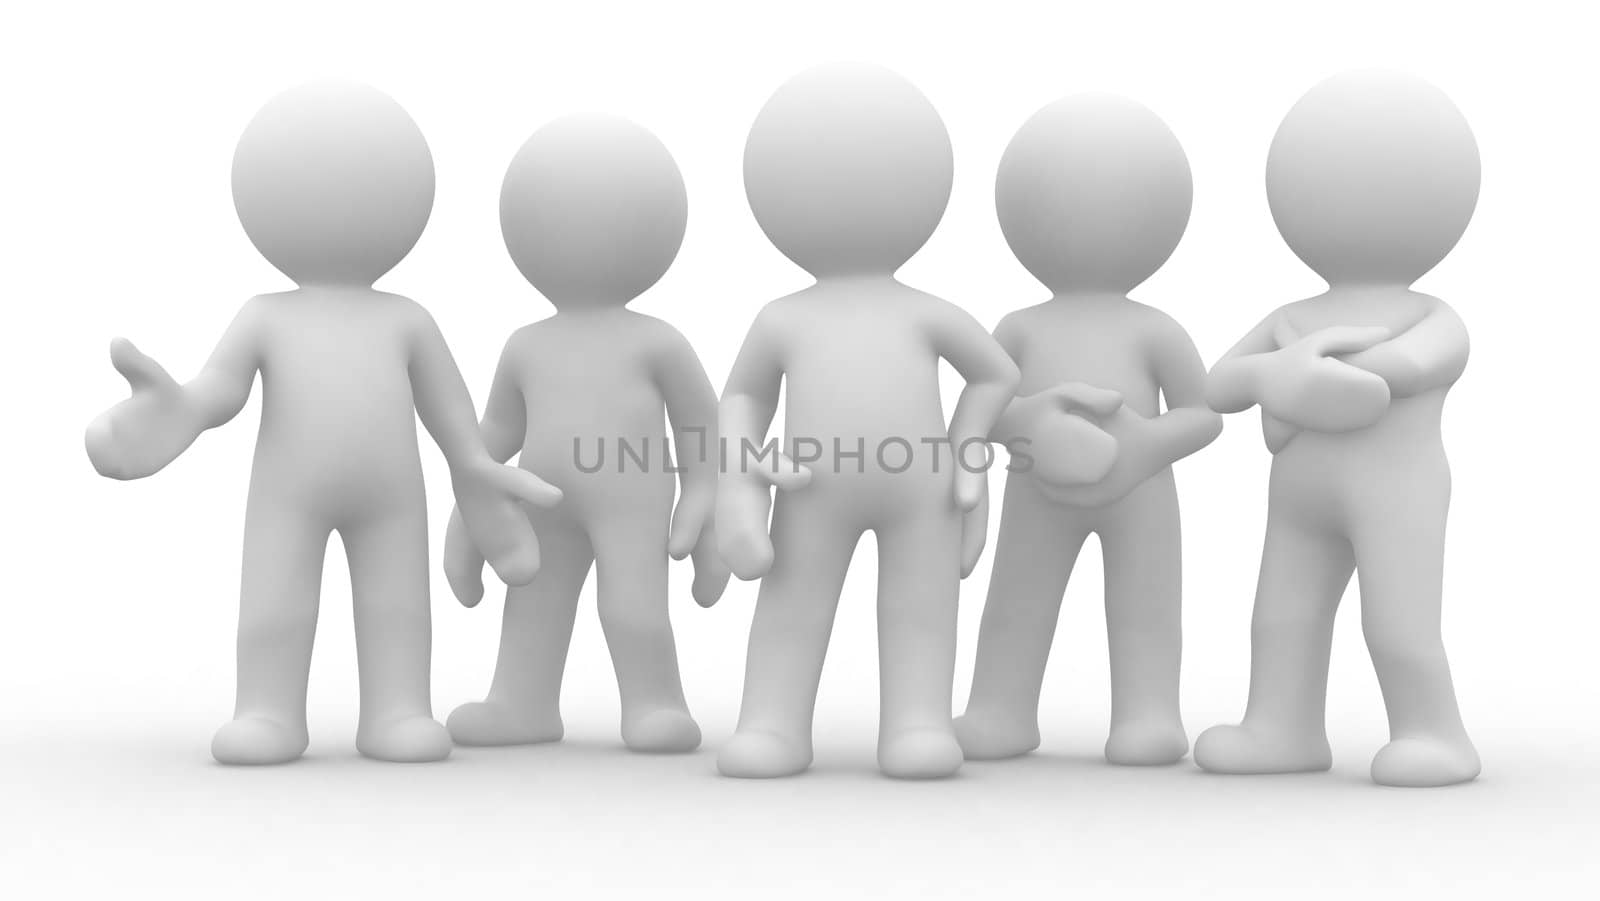 a special group of five 3d humans in different poses